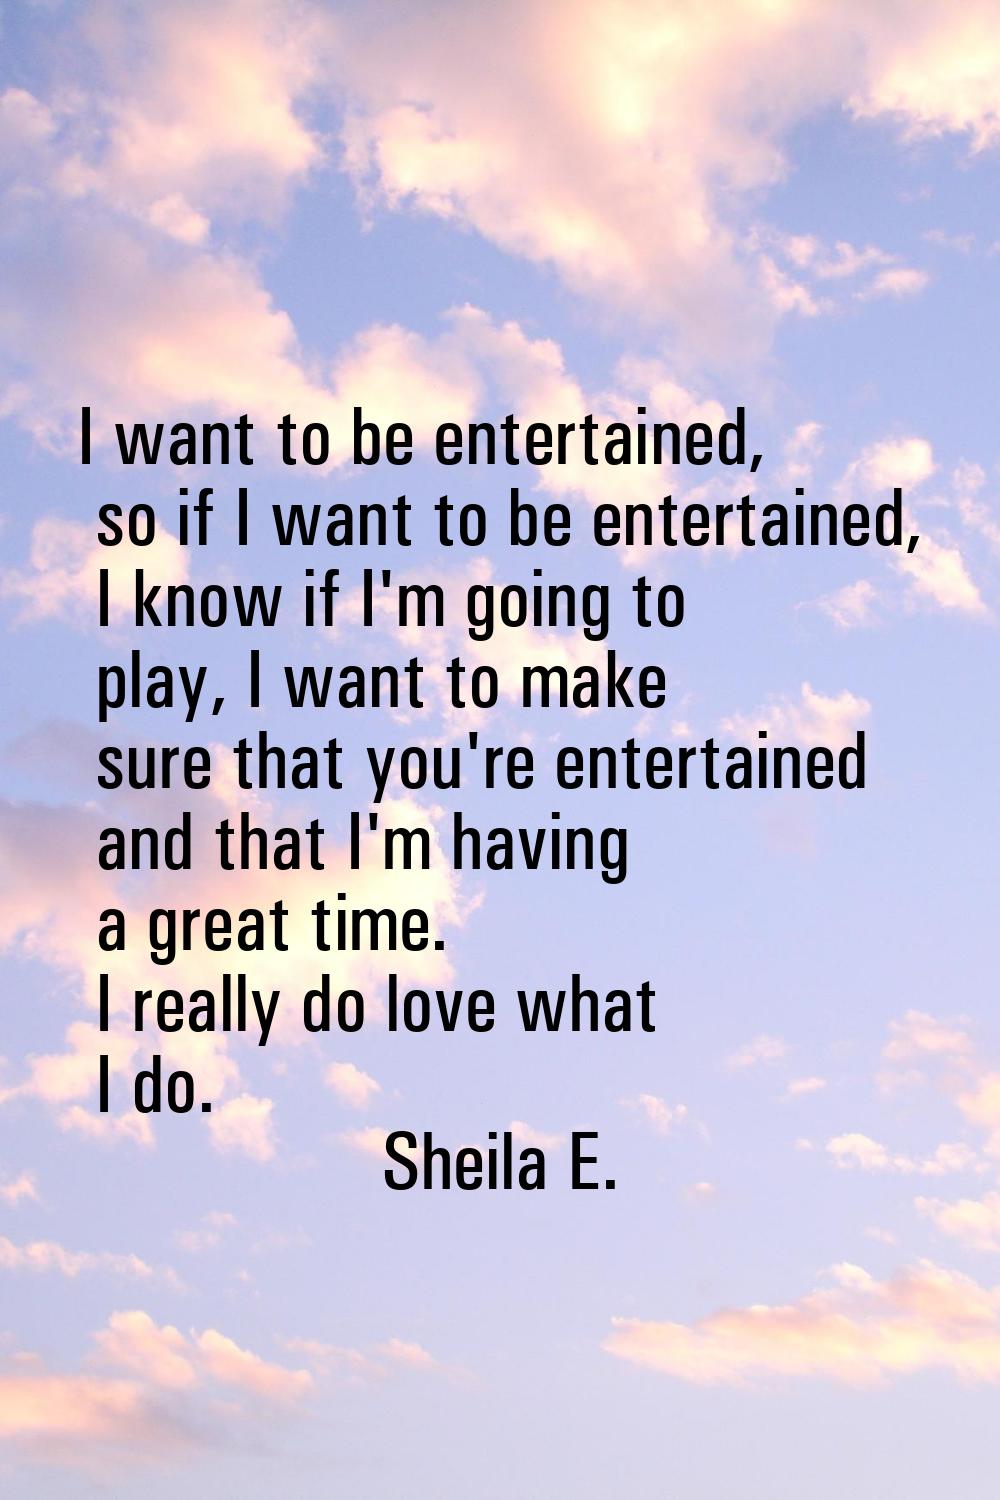 I want to be entertained, so if I want to be entertained, I know if I'm going to play, I want to ma